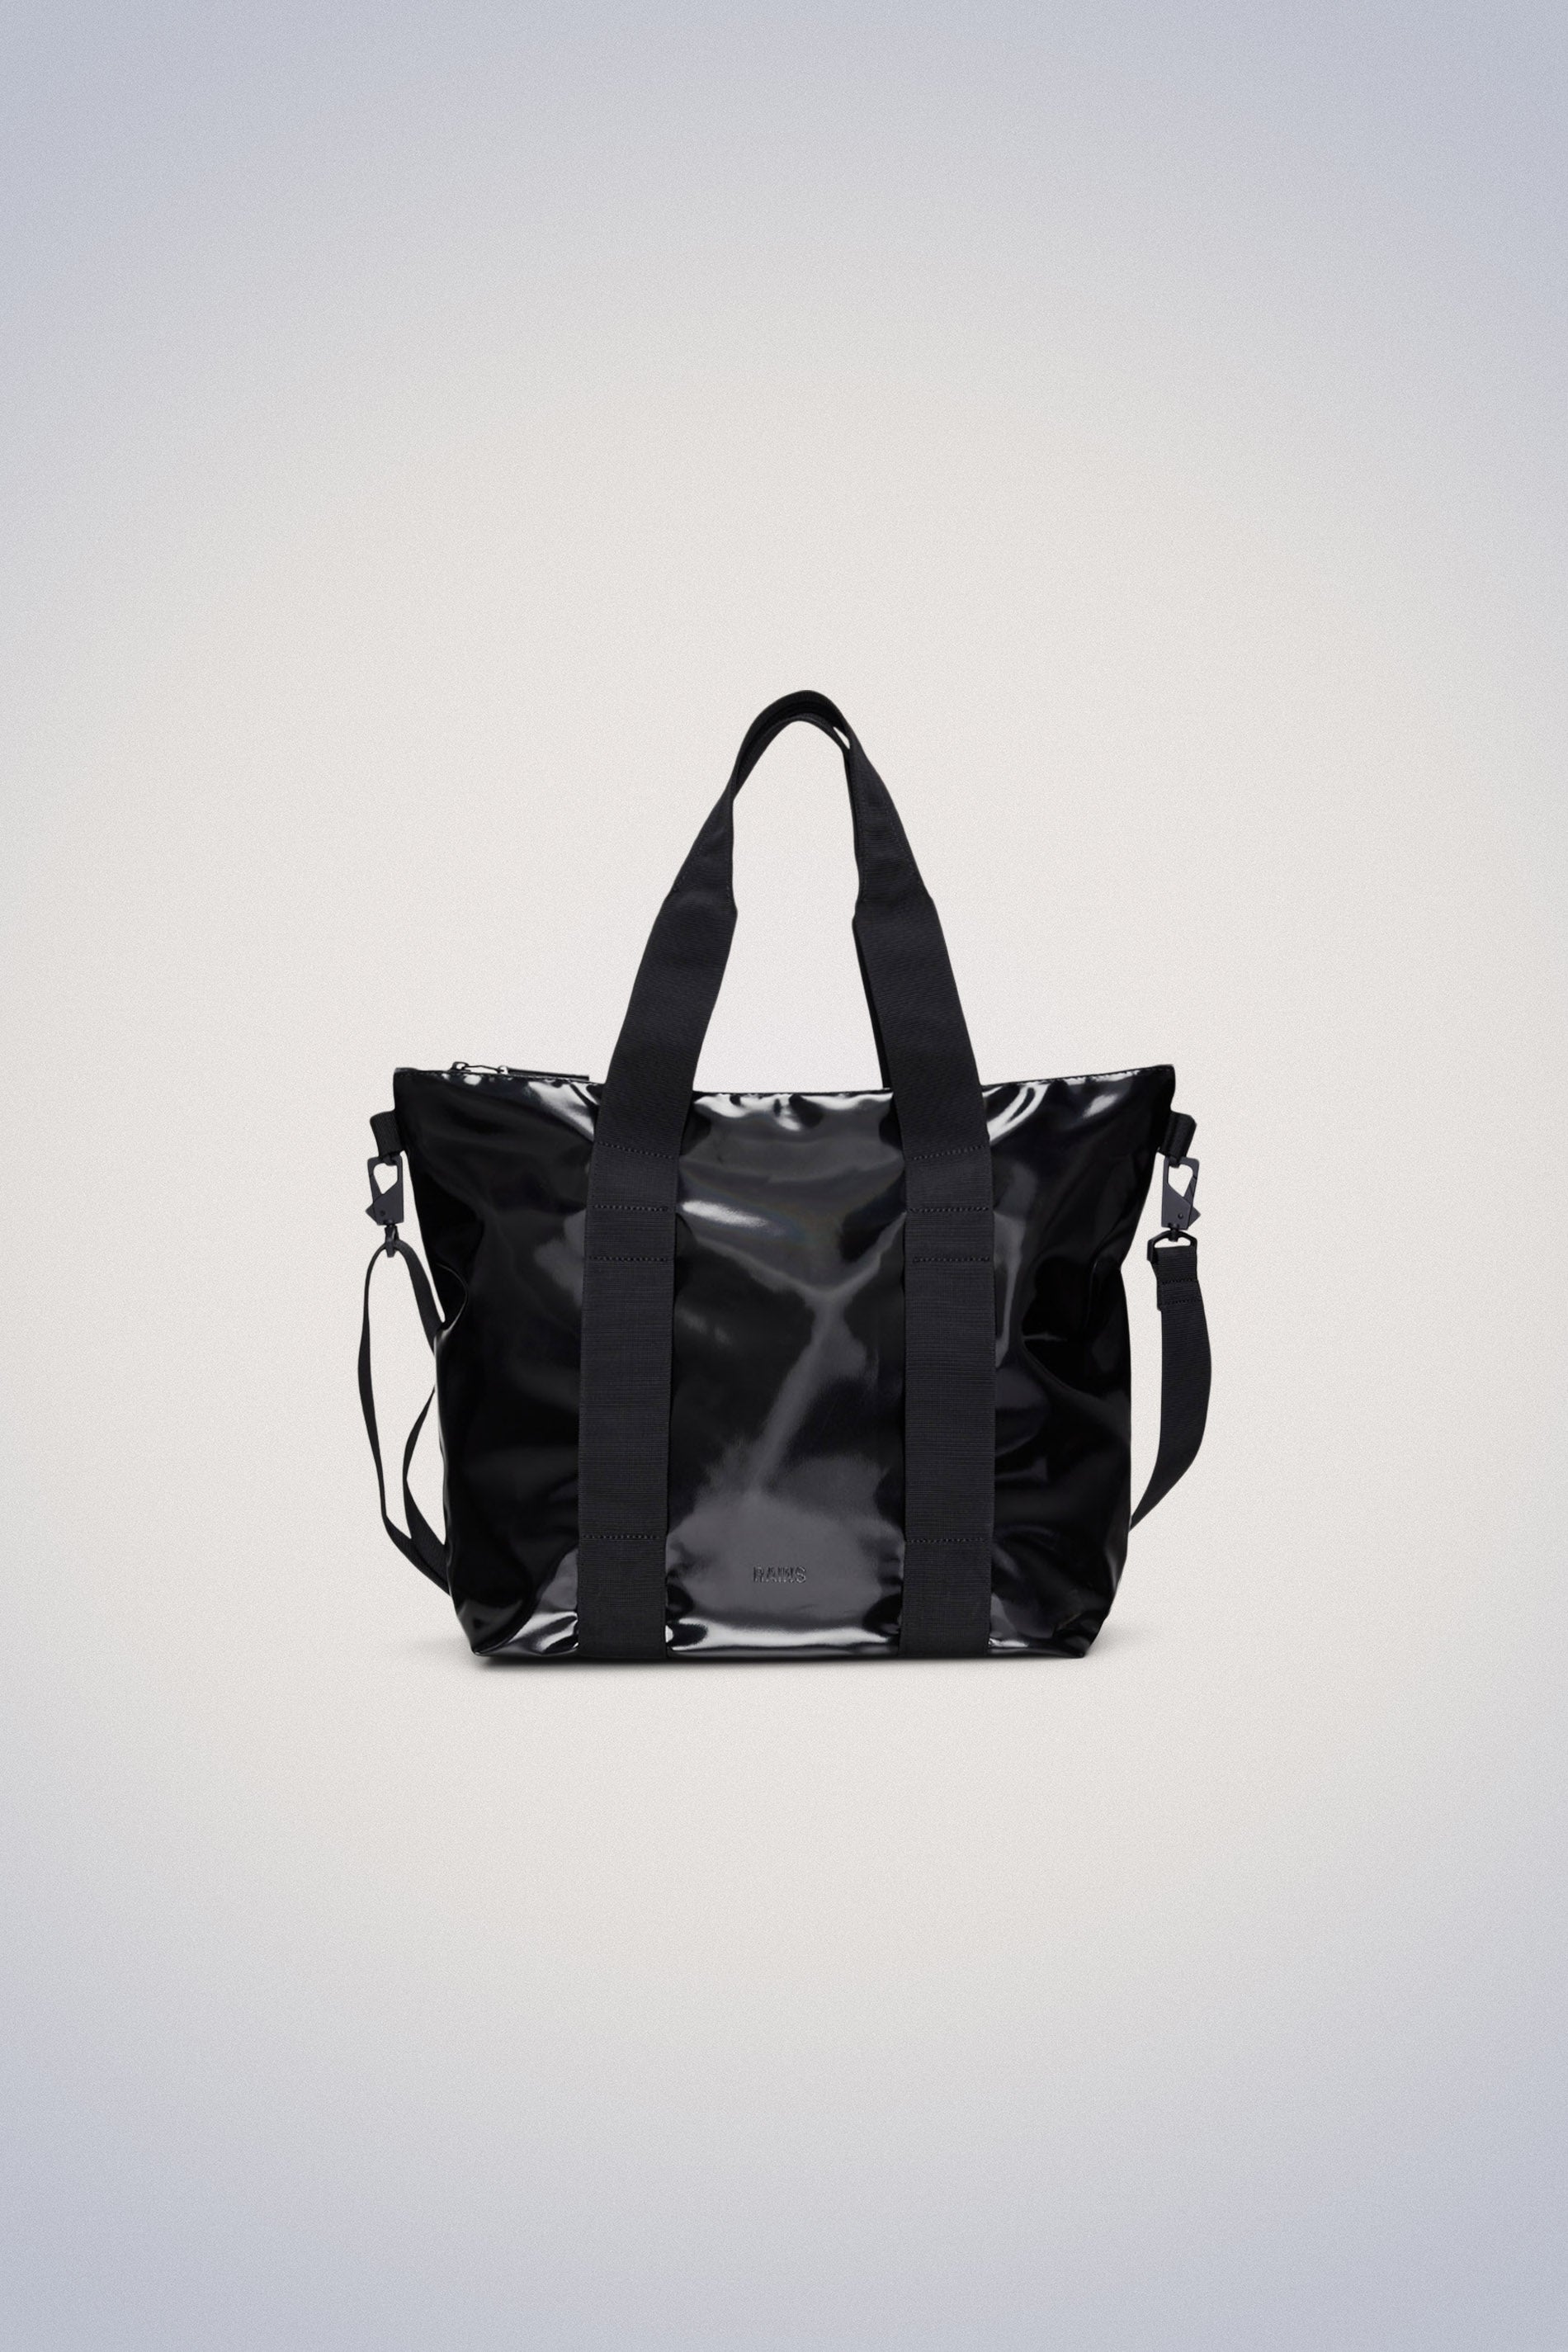 Waterproof Tote Bags | Buy Tote Bag with Zipper | Free Shipping